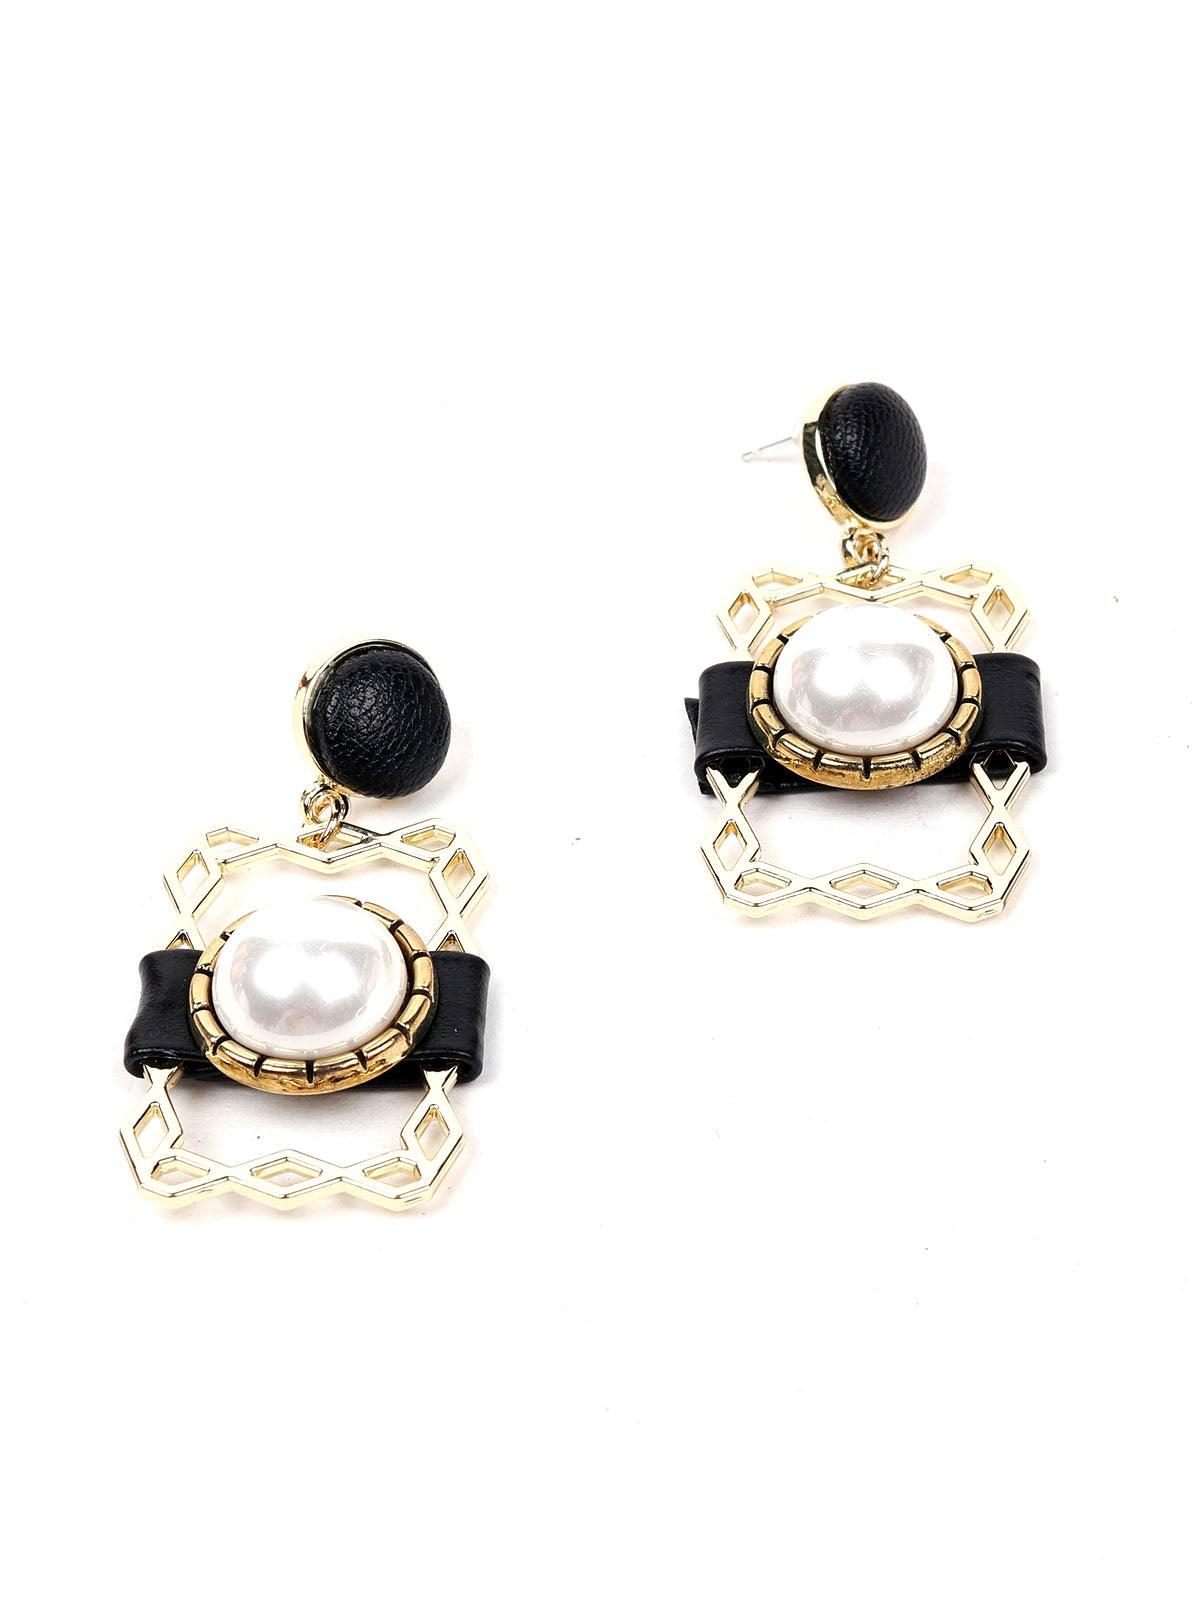 Women's Exquisite Gold Textured Earring With Pearl Embellishments - Odette